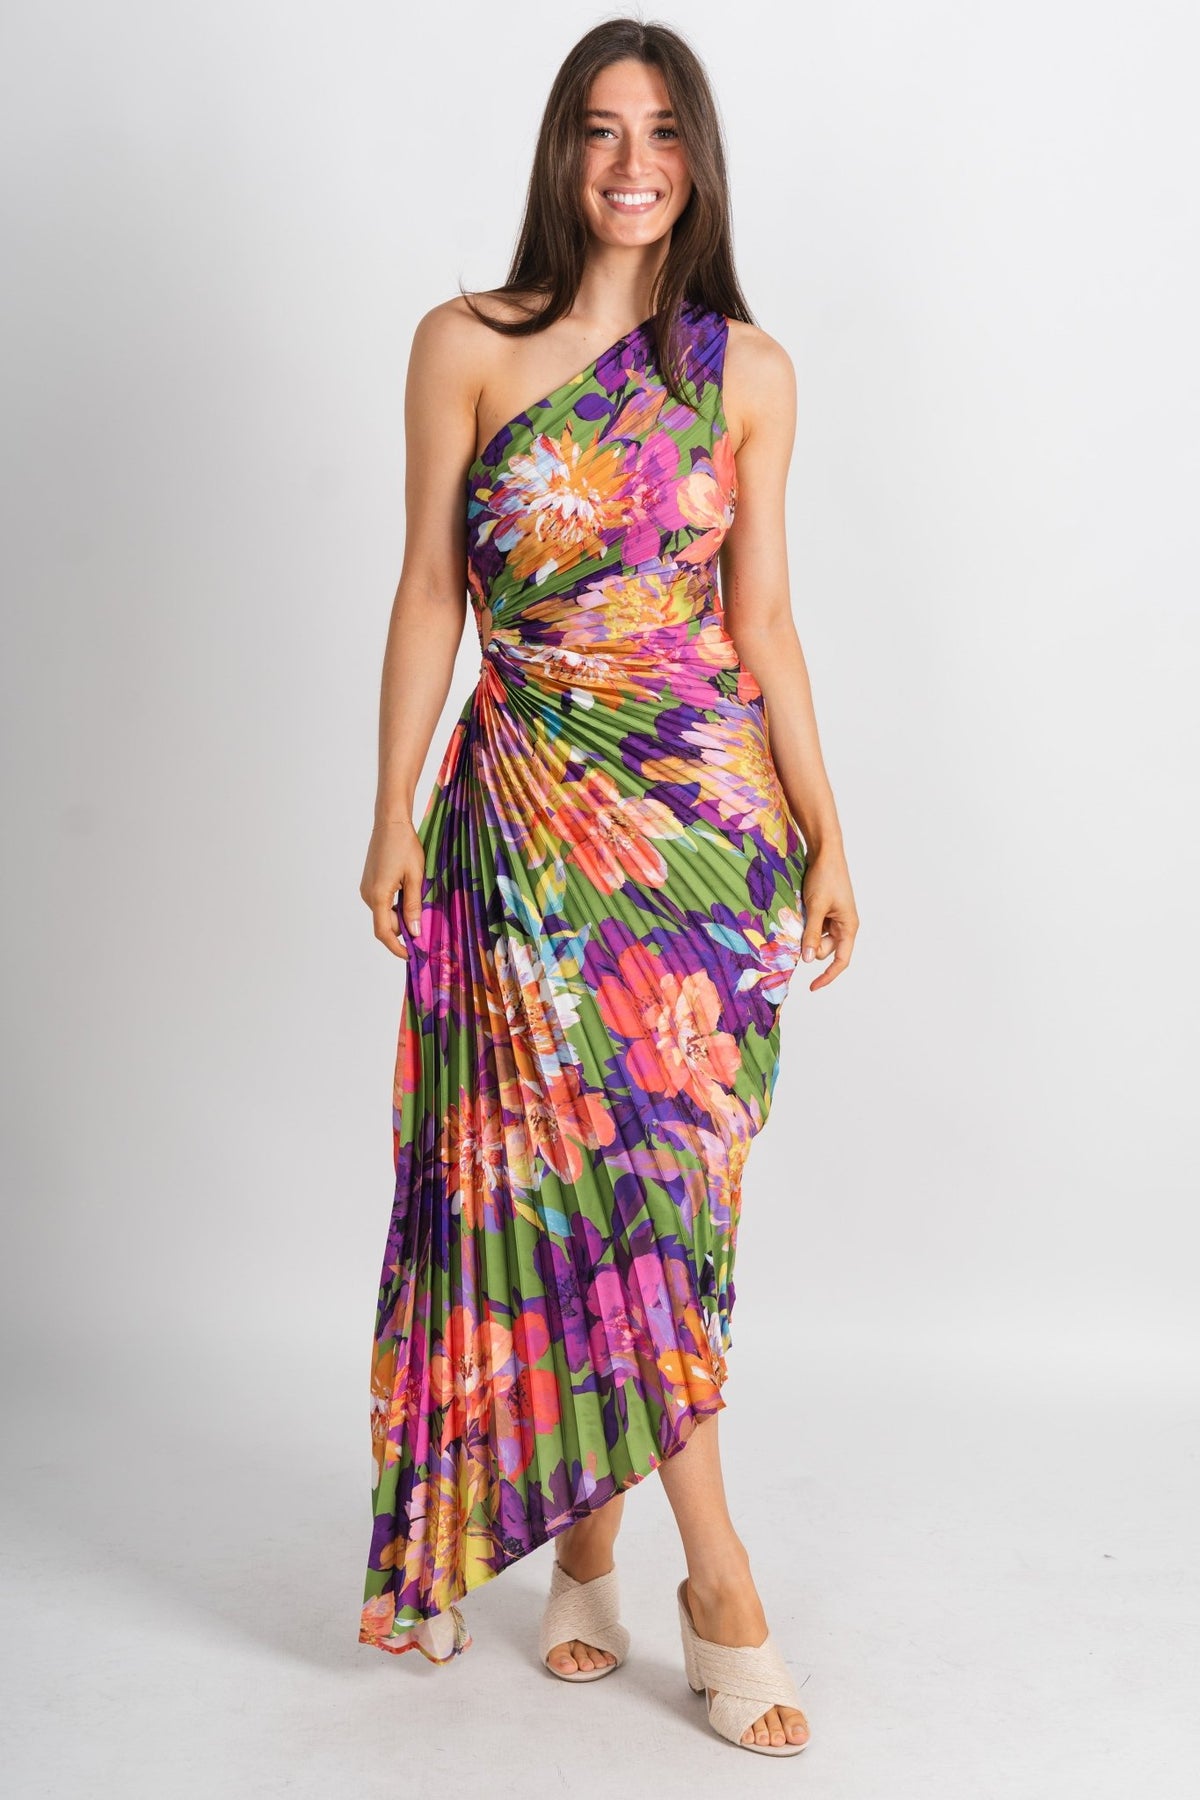 Tropical pleated maxi dress Ibiza Rio - Trendy dress - Cute Vacation Collection at Lush Fashion Lounge Boutique in Oklahoma City